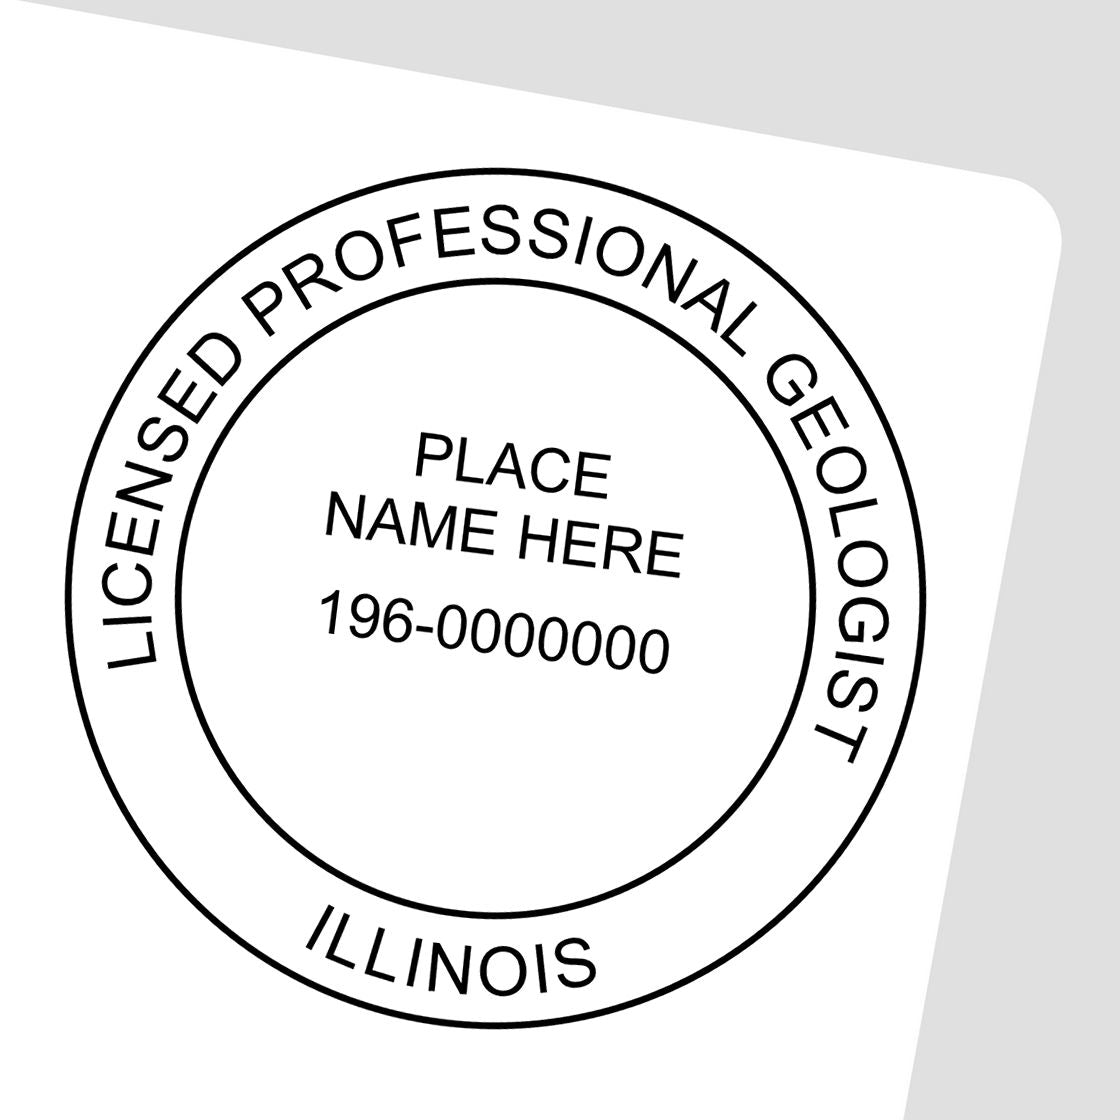 The main image for the Self-Inking Illinois Geologist Stamp depicting a sample of the imprint and imprint sample